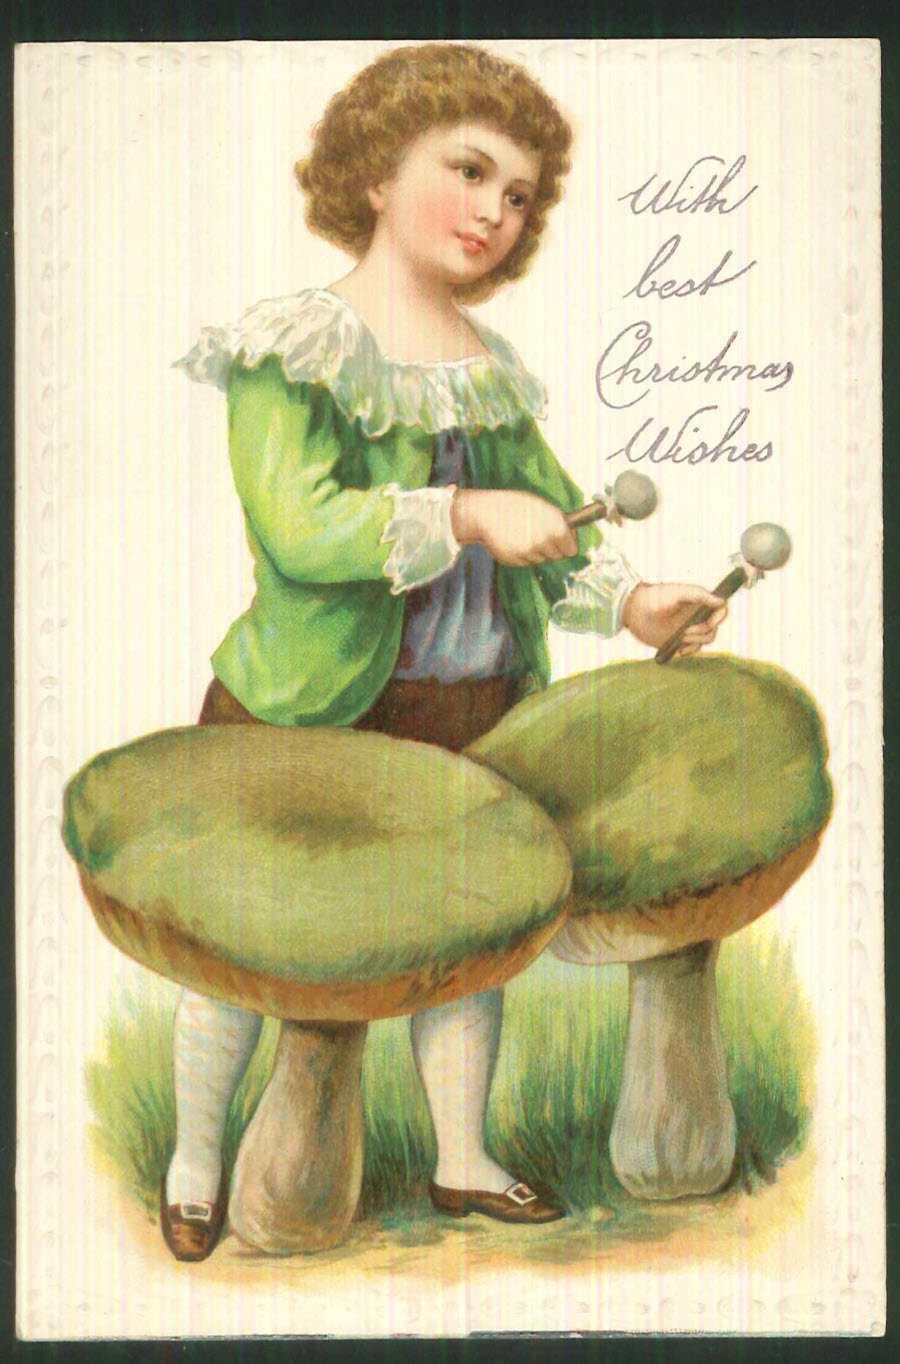 Postcard ''With Best Christmas Wishes''' c 1915